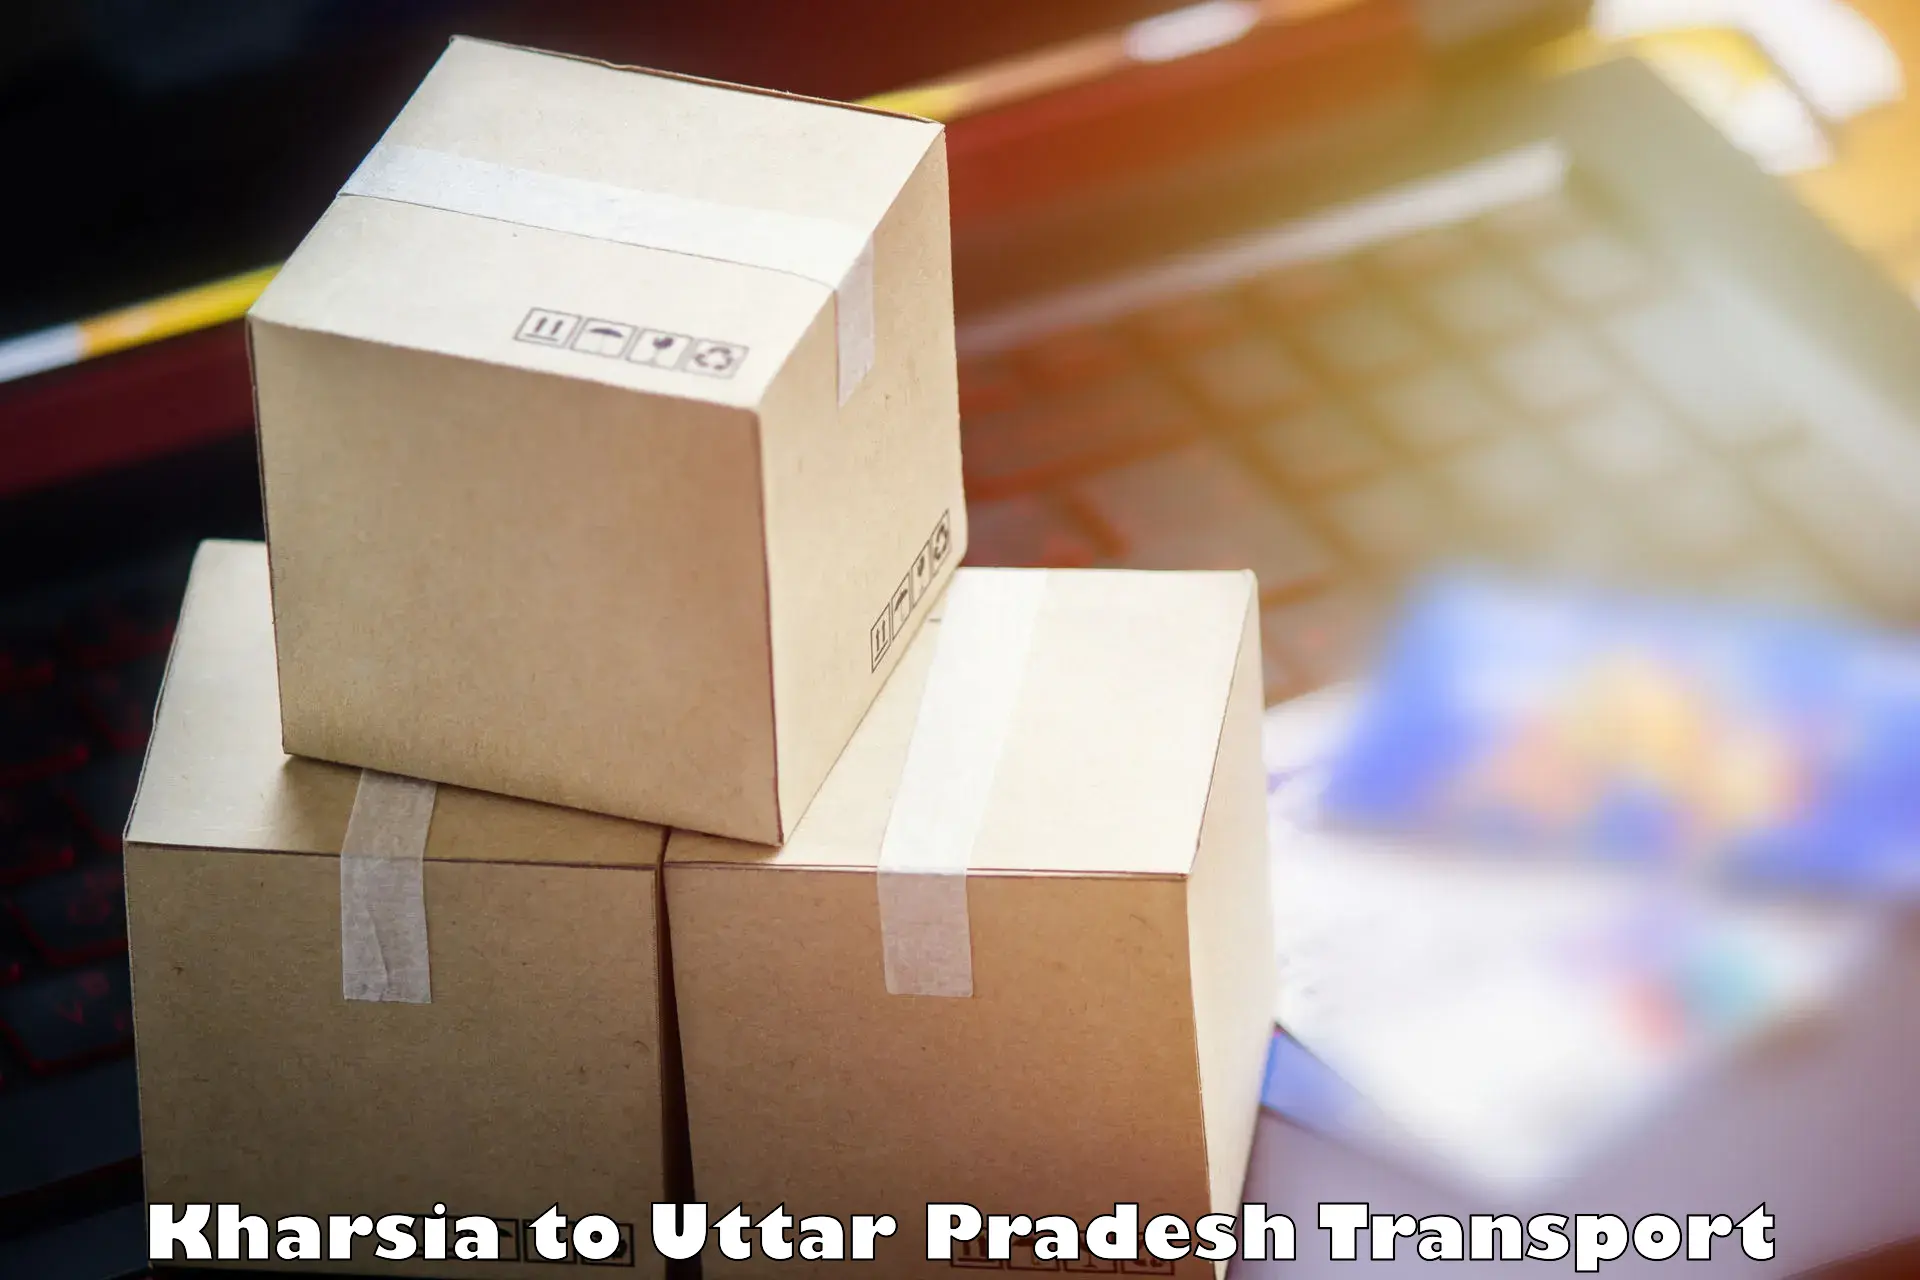 Express transport services Kharsia to Aligarh